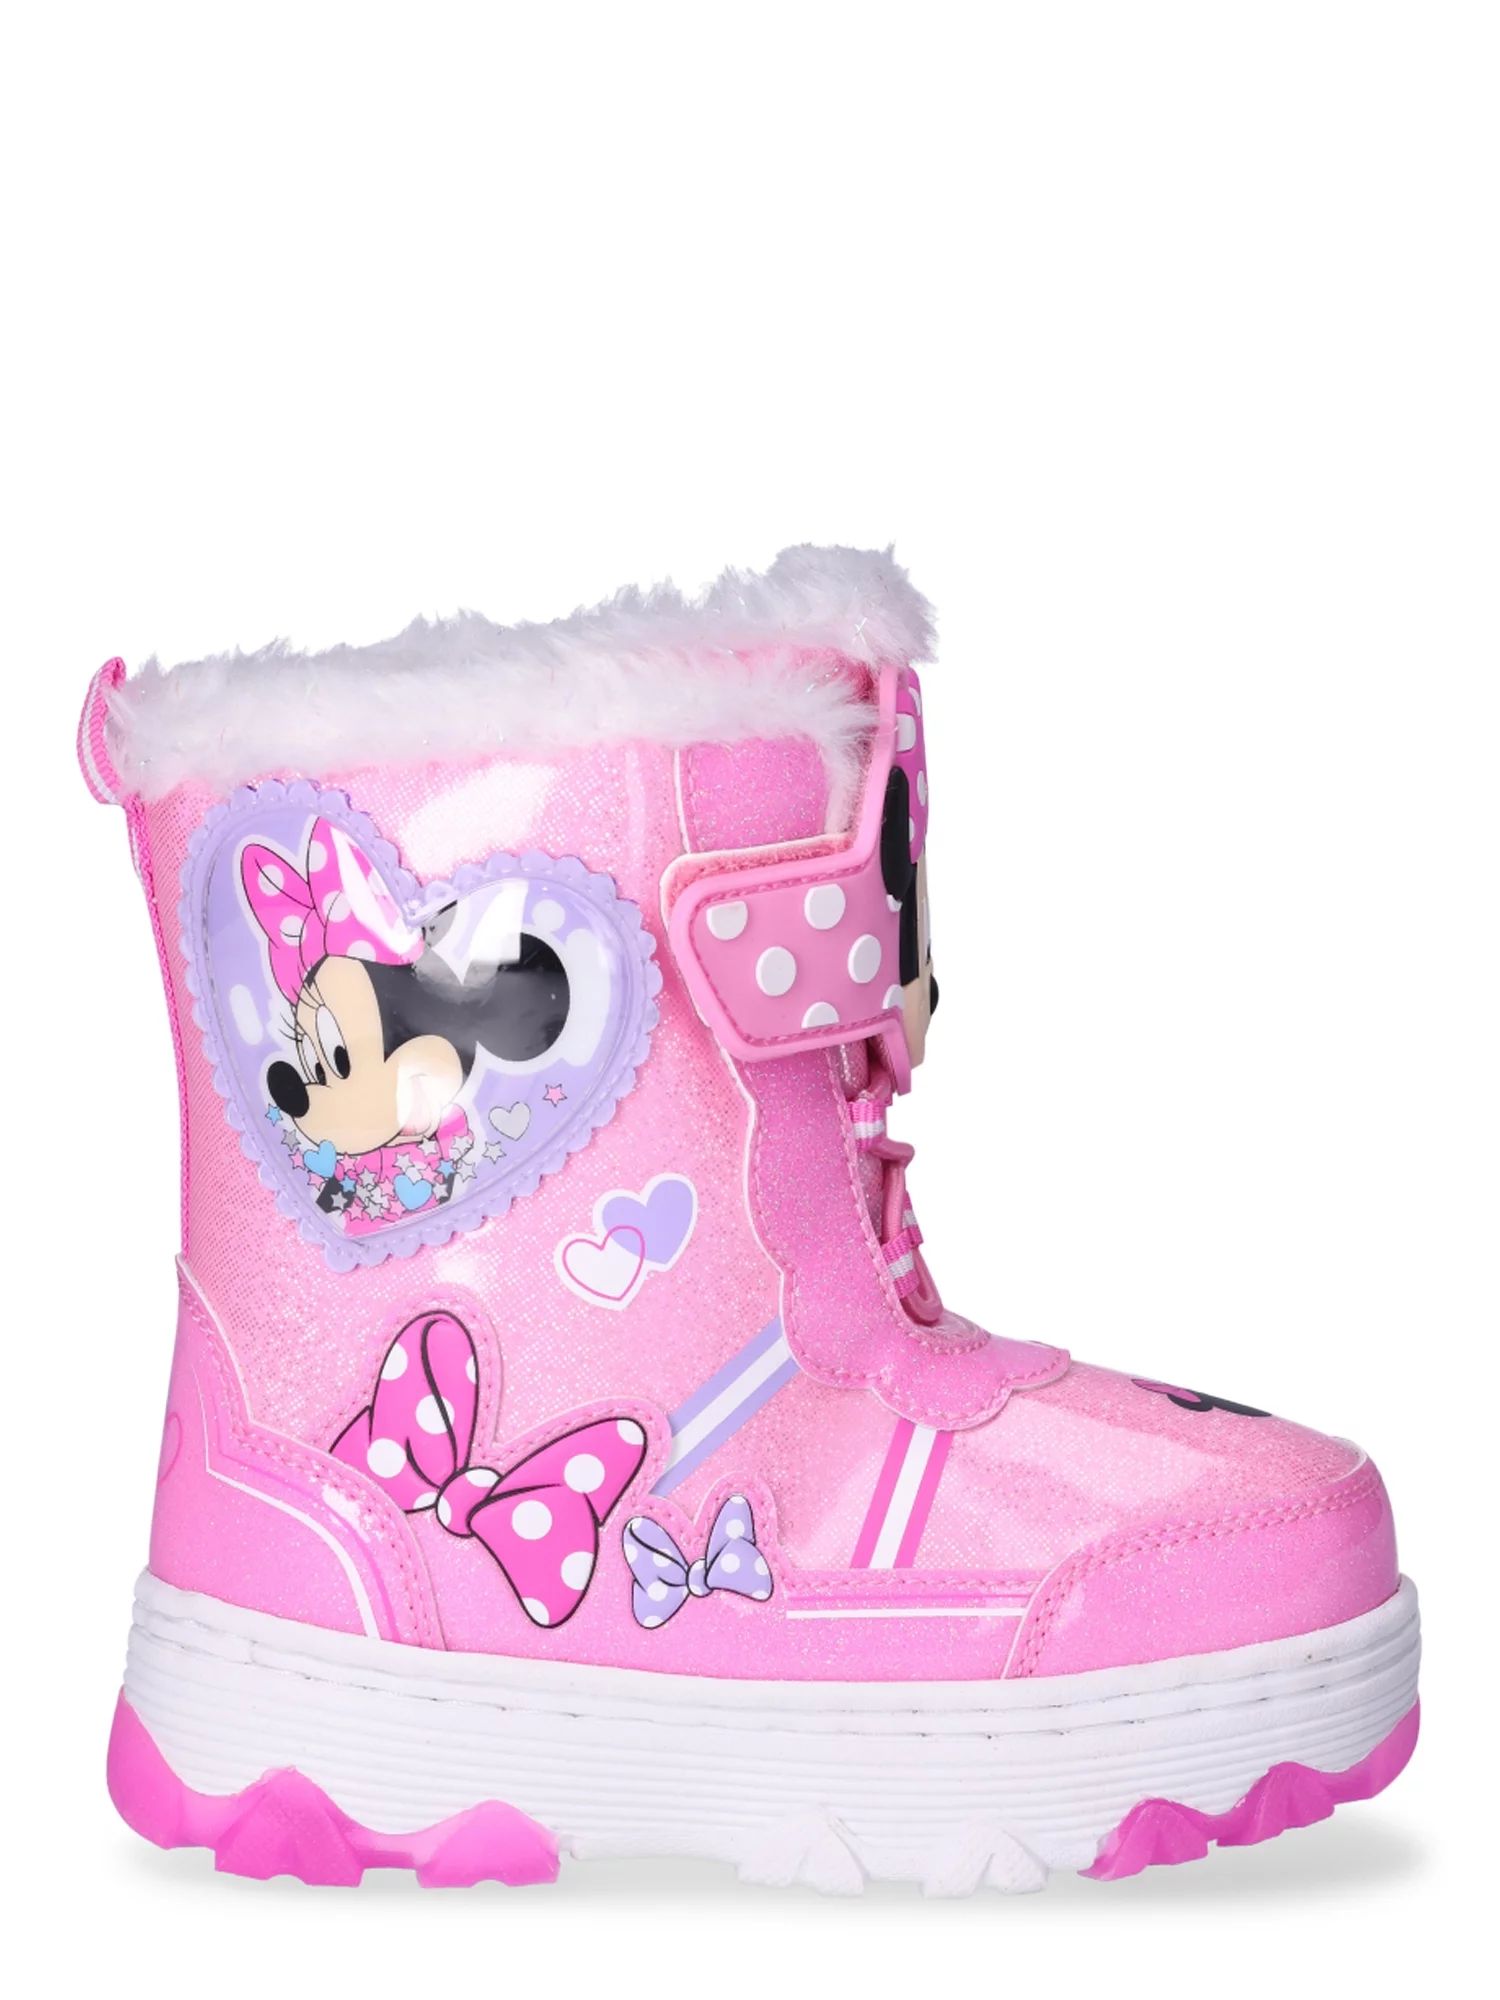 Minnie Mouse Toddler Girl Light Up Winter Snow Boots, Sizes 7-12 | Walmart (US)